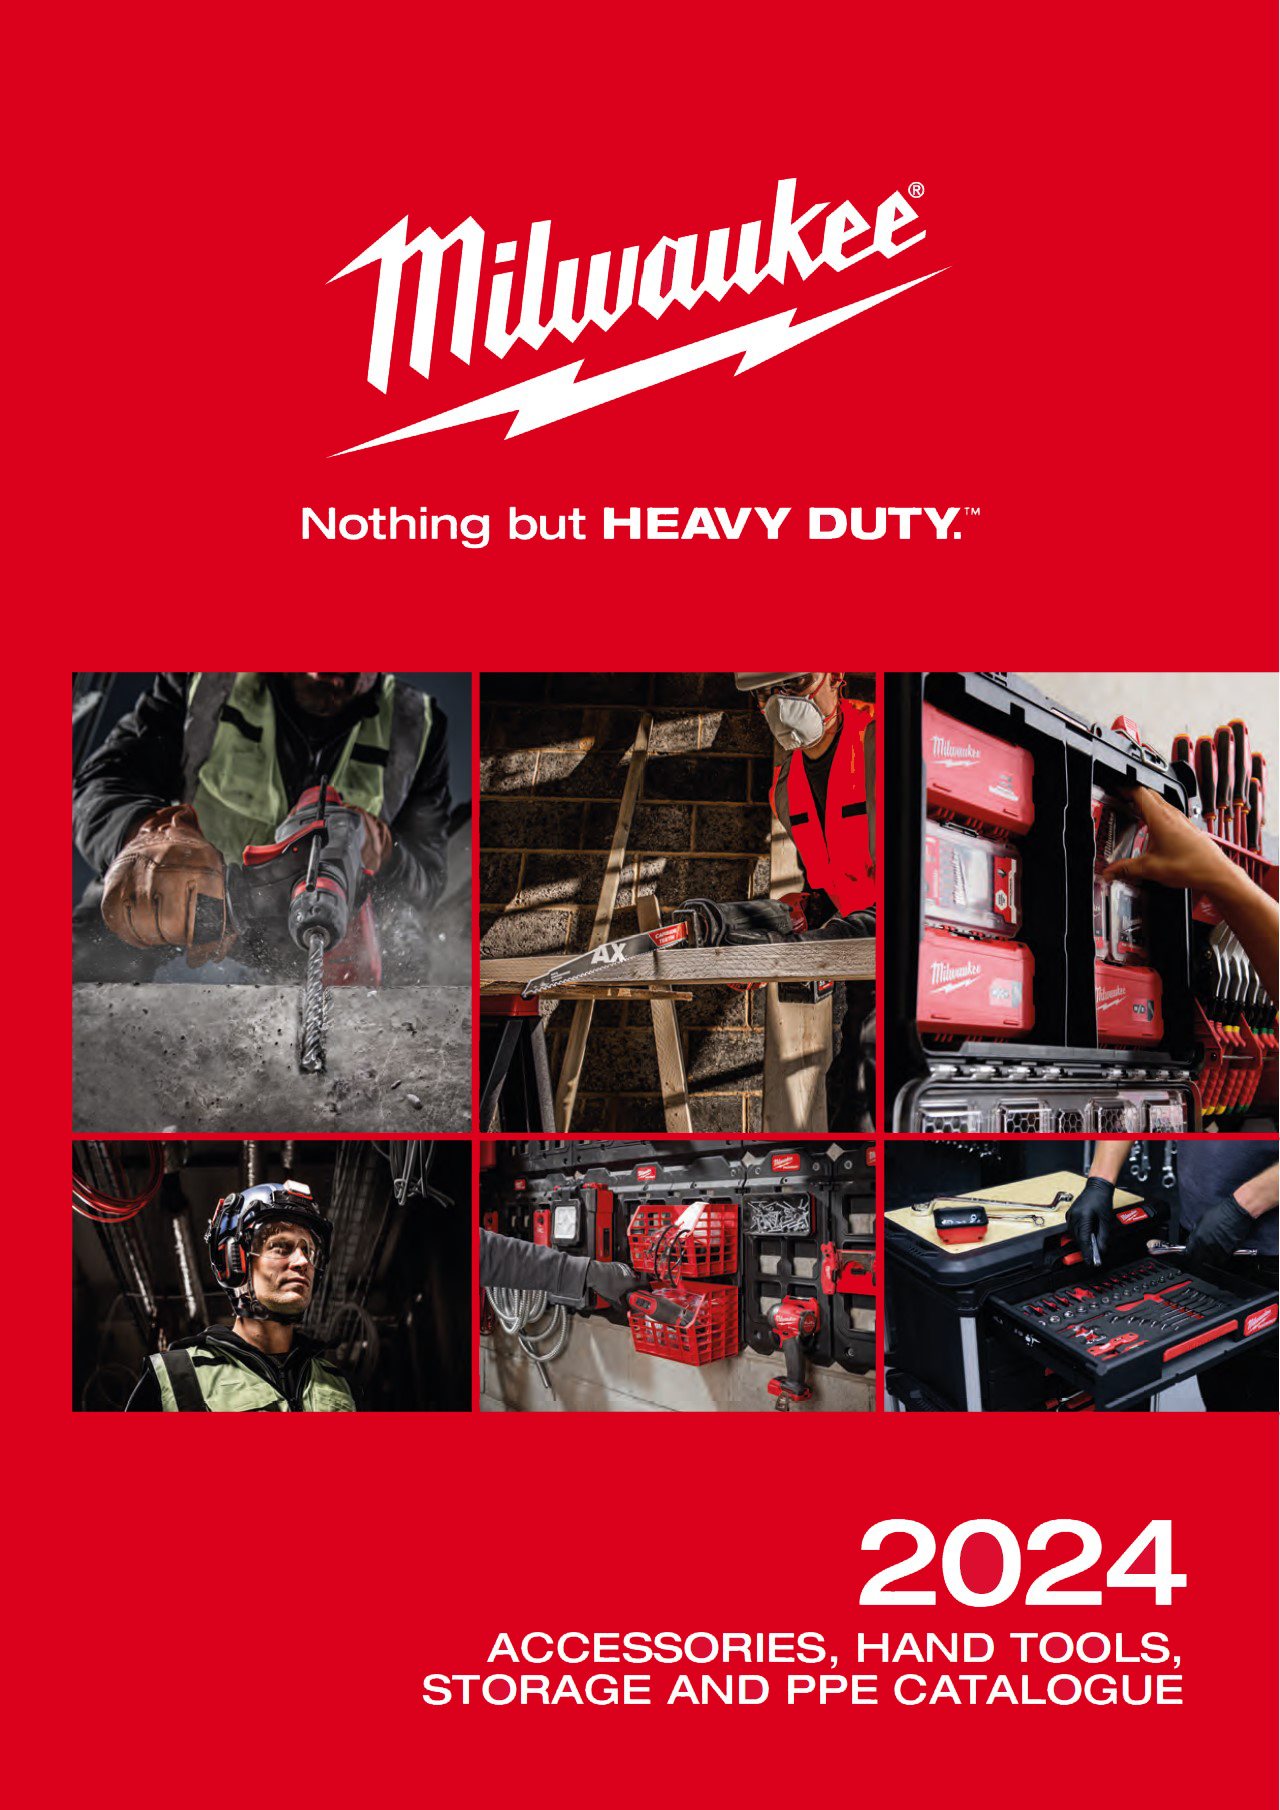 Accessories, Hand Tools, Storage and PPE Catalogue